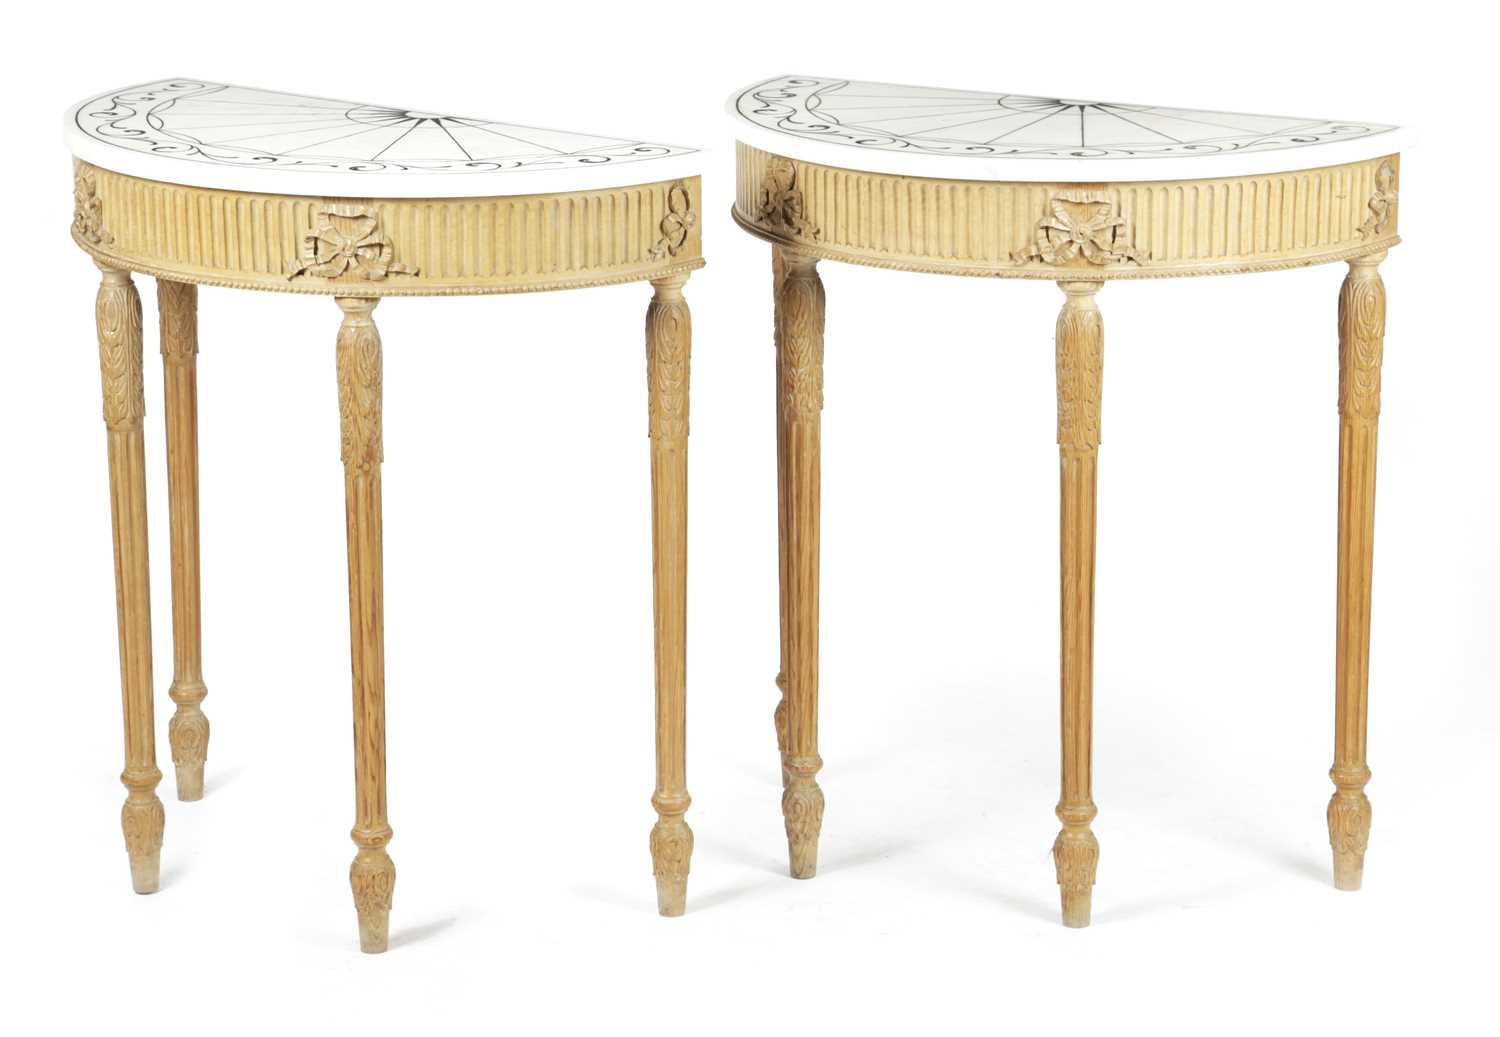 A PAIR OF PINE DEMI-LUNE SIDE TABLES IN GEORGE III STYLE, LATE 19TH / EARLY 20TH CENTURY each with